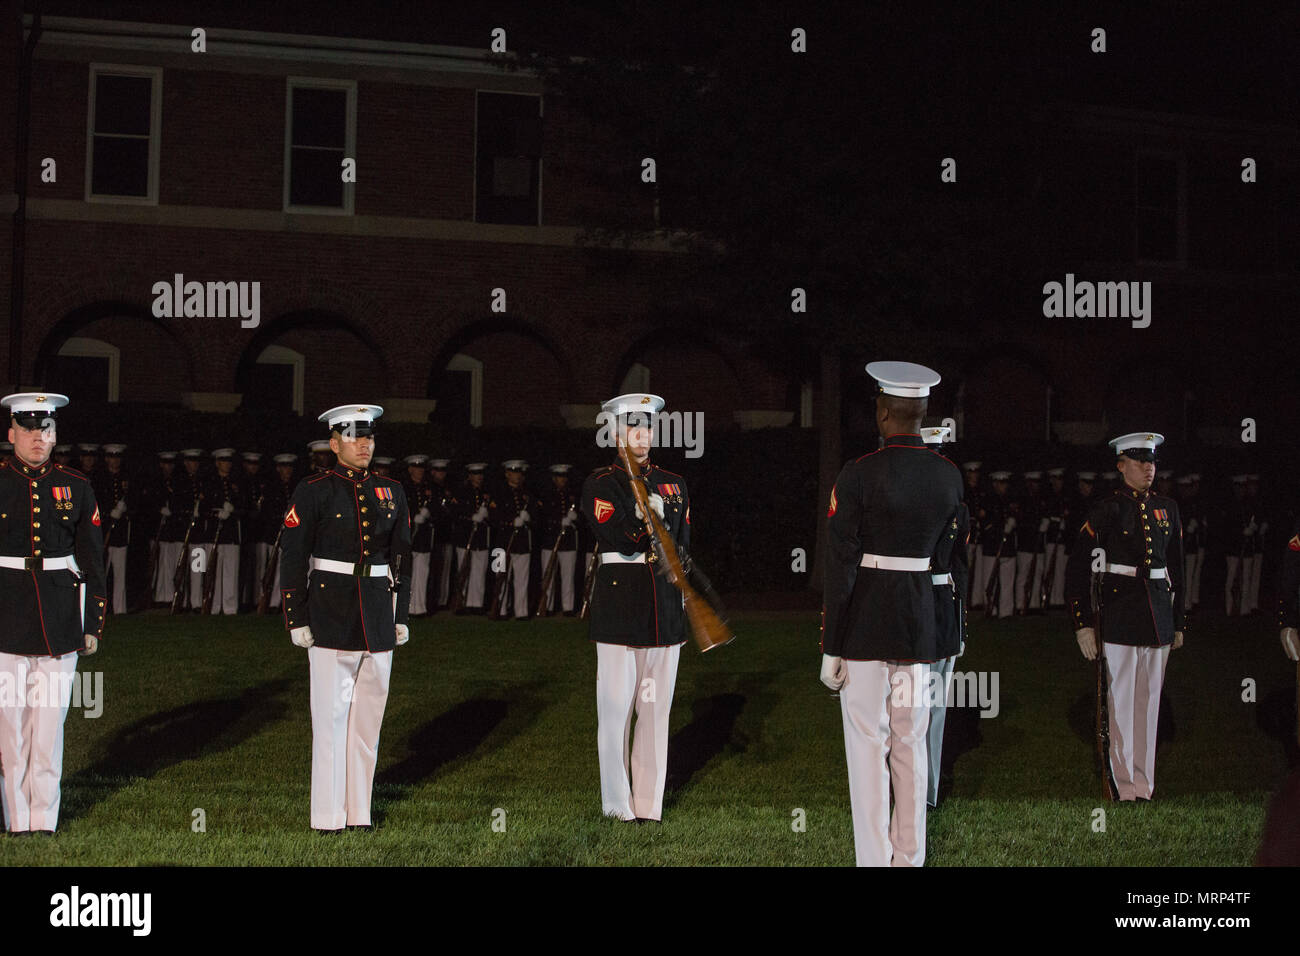 The Marine Corps Silent Drill Platoon performs during an evening parade at Marine Barracks Washington, Washington, D.C., June 23, 2017. Evening parades are held as a means of honoring senior officials, distinguished citizens and supporters of the Marine Corps. (U.S. Marine Corps photo by Stephon L. McRae) Stock Photo